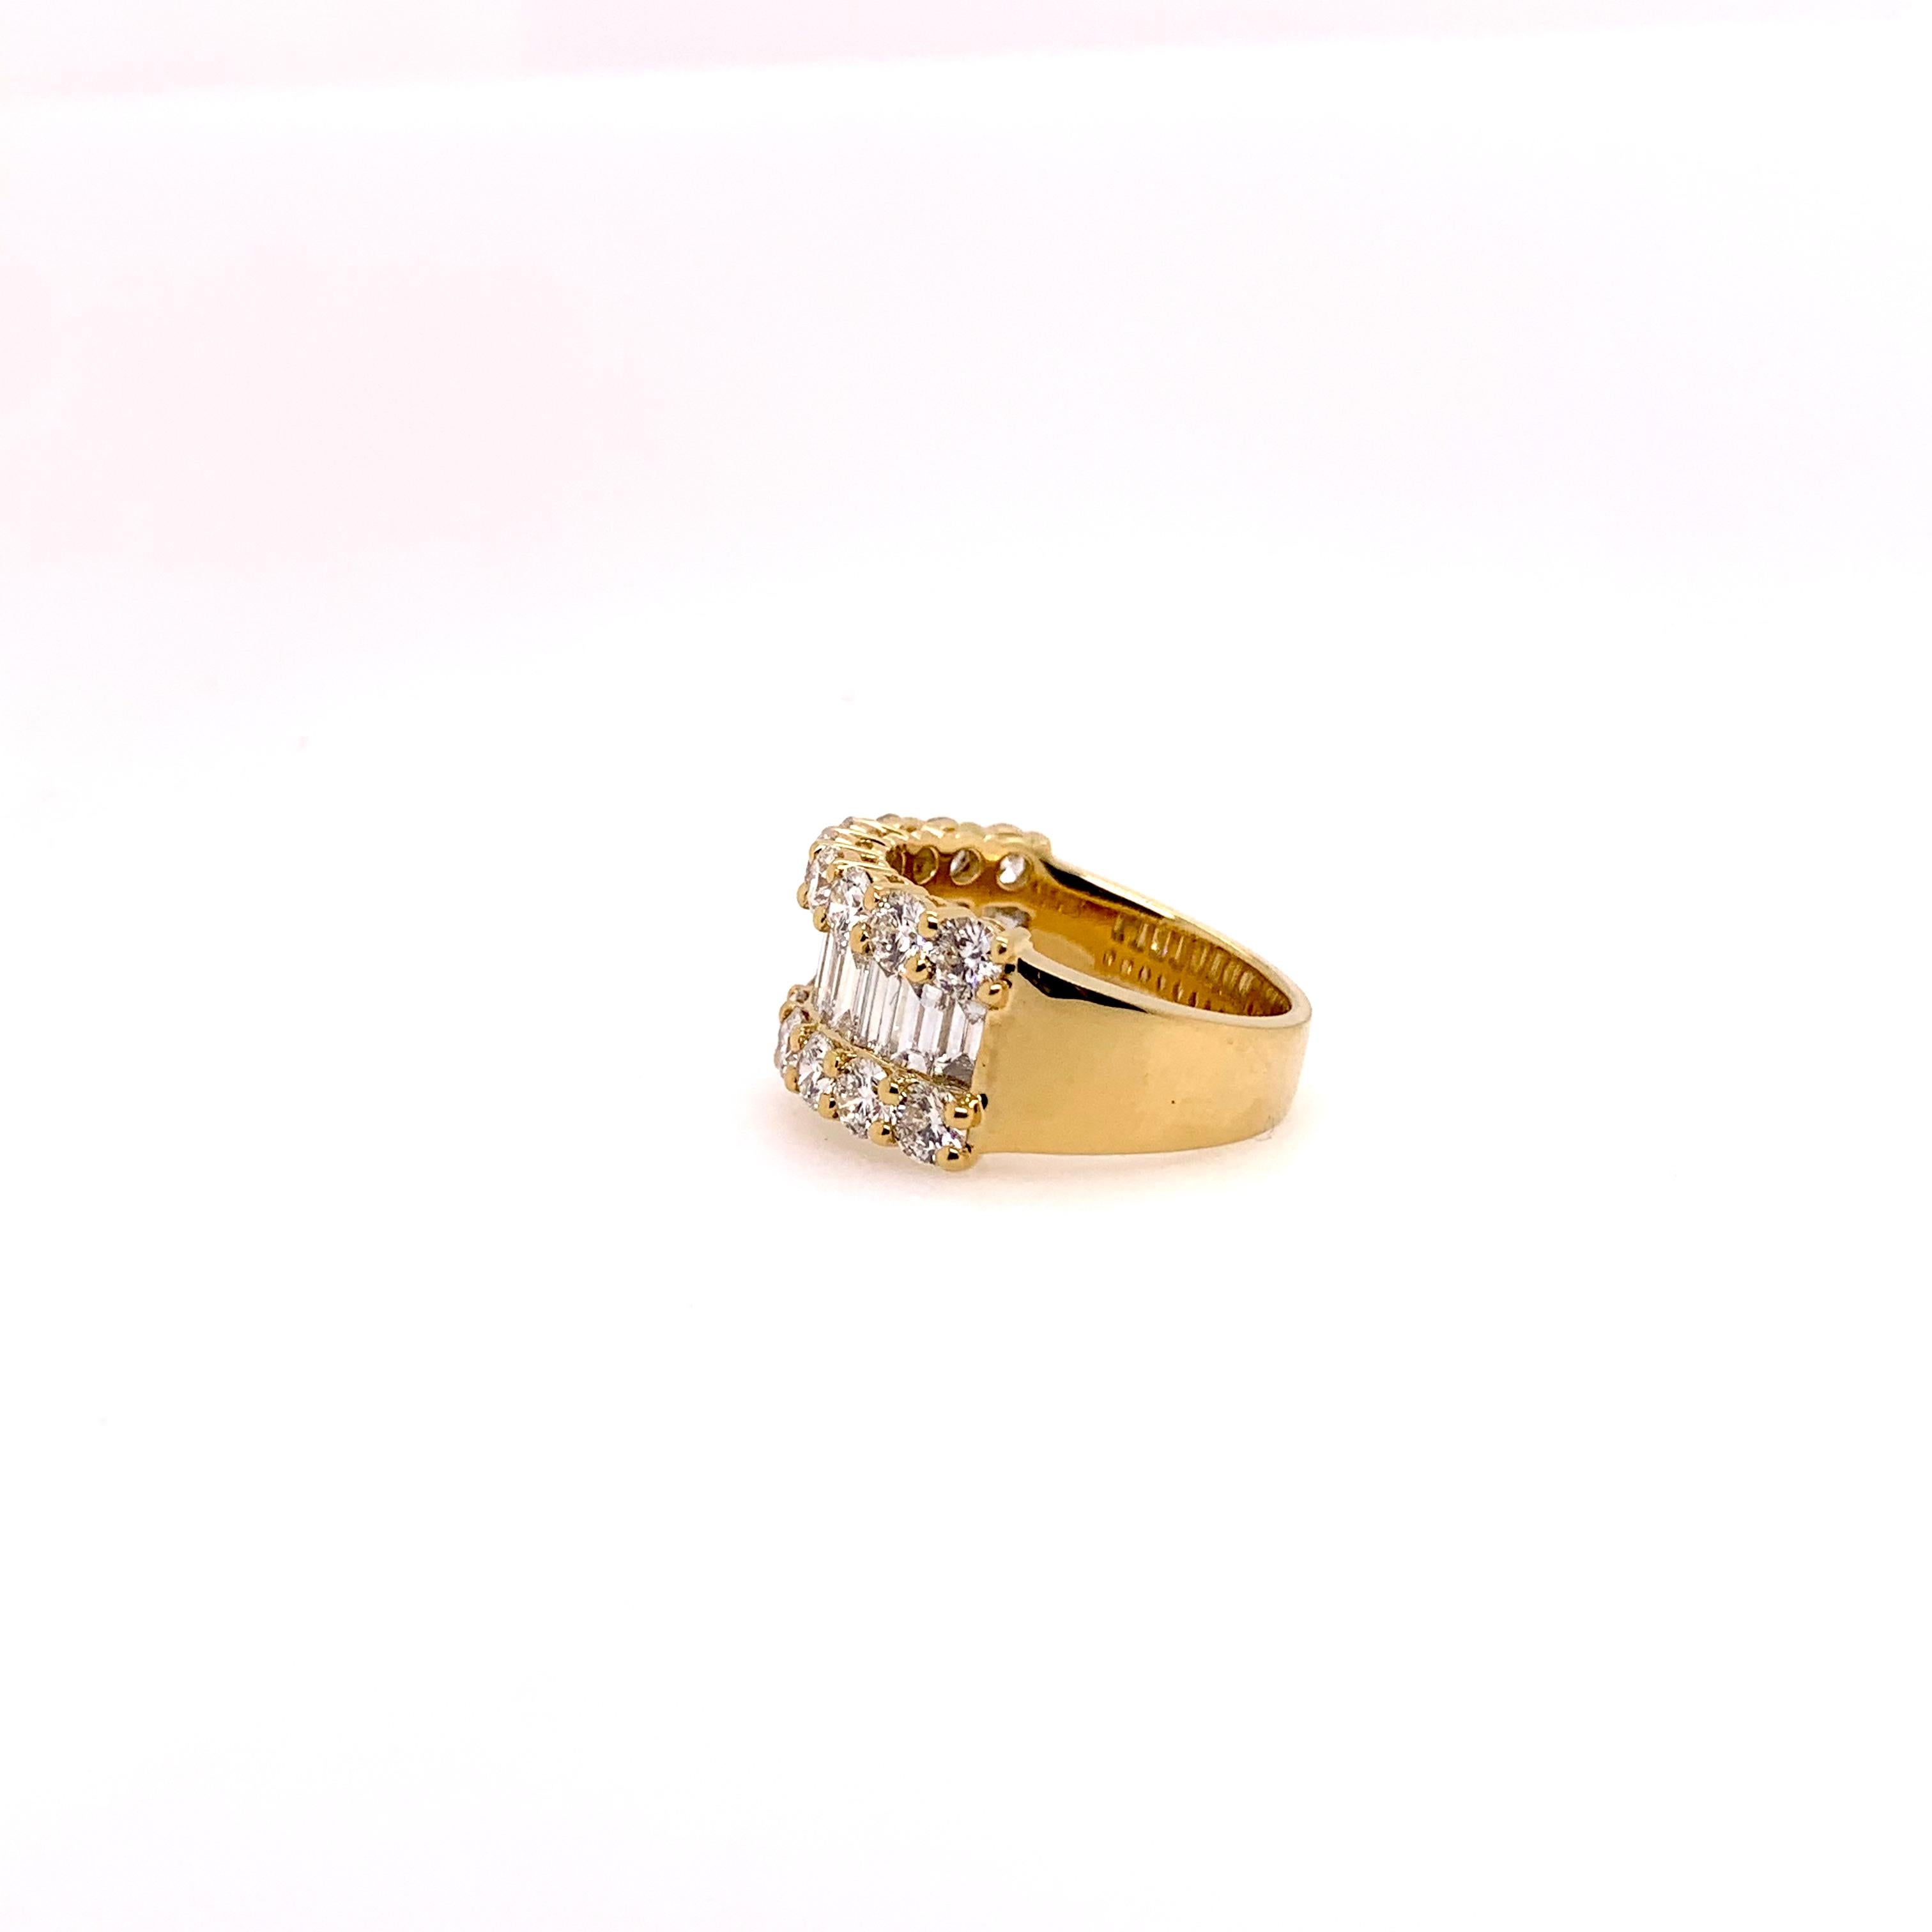 This timeless diamond band will forever be in style for any casual or formal occasion. This 18k yellow gold band has large round brilliant diamonds prong set on the edges while the diamond baguettes are the center focus.  The diamonds come to 3.46